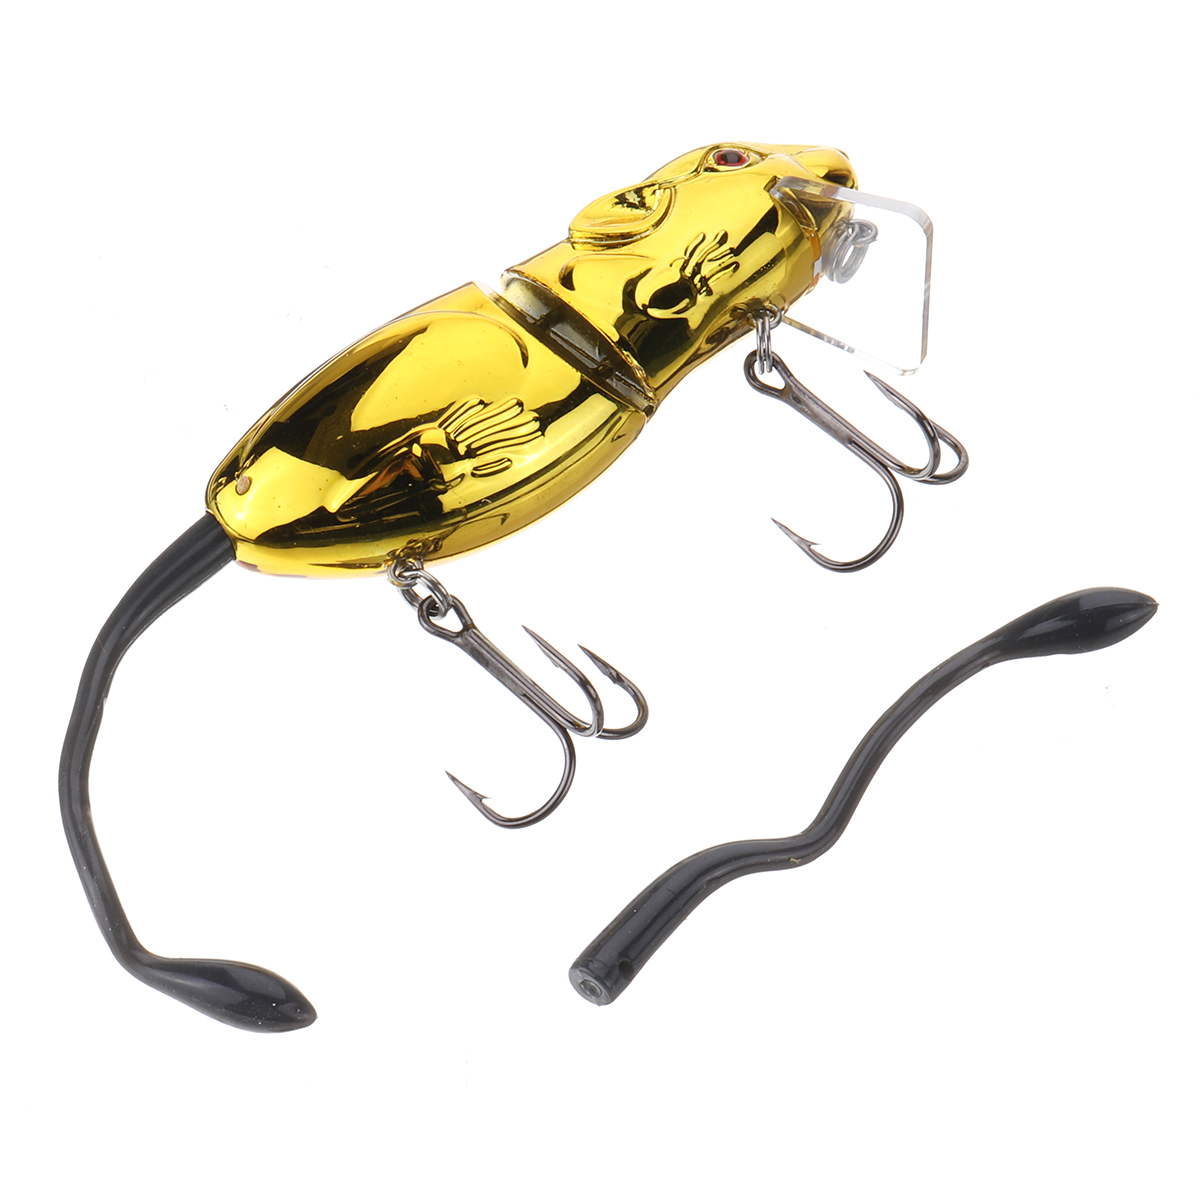 ZANLURE-1PC-16CM-45g-3D-Eyes-Mice-Rat-Shape-Lure-Artificial-Fishing-Bait-With-2-Hooks-Fishing-Tackle-1646066-7